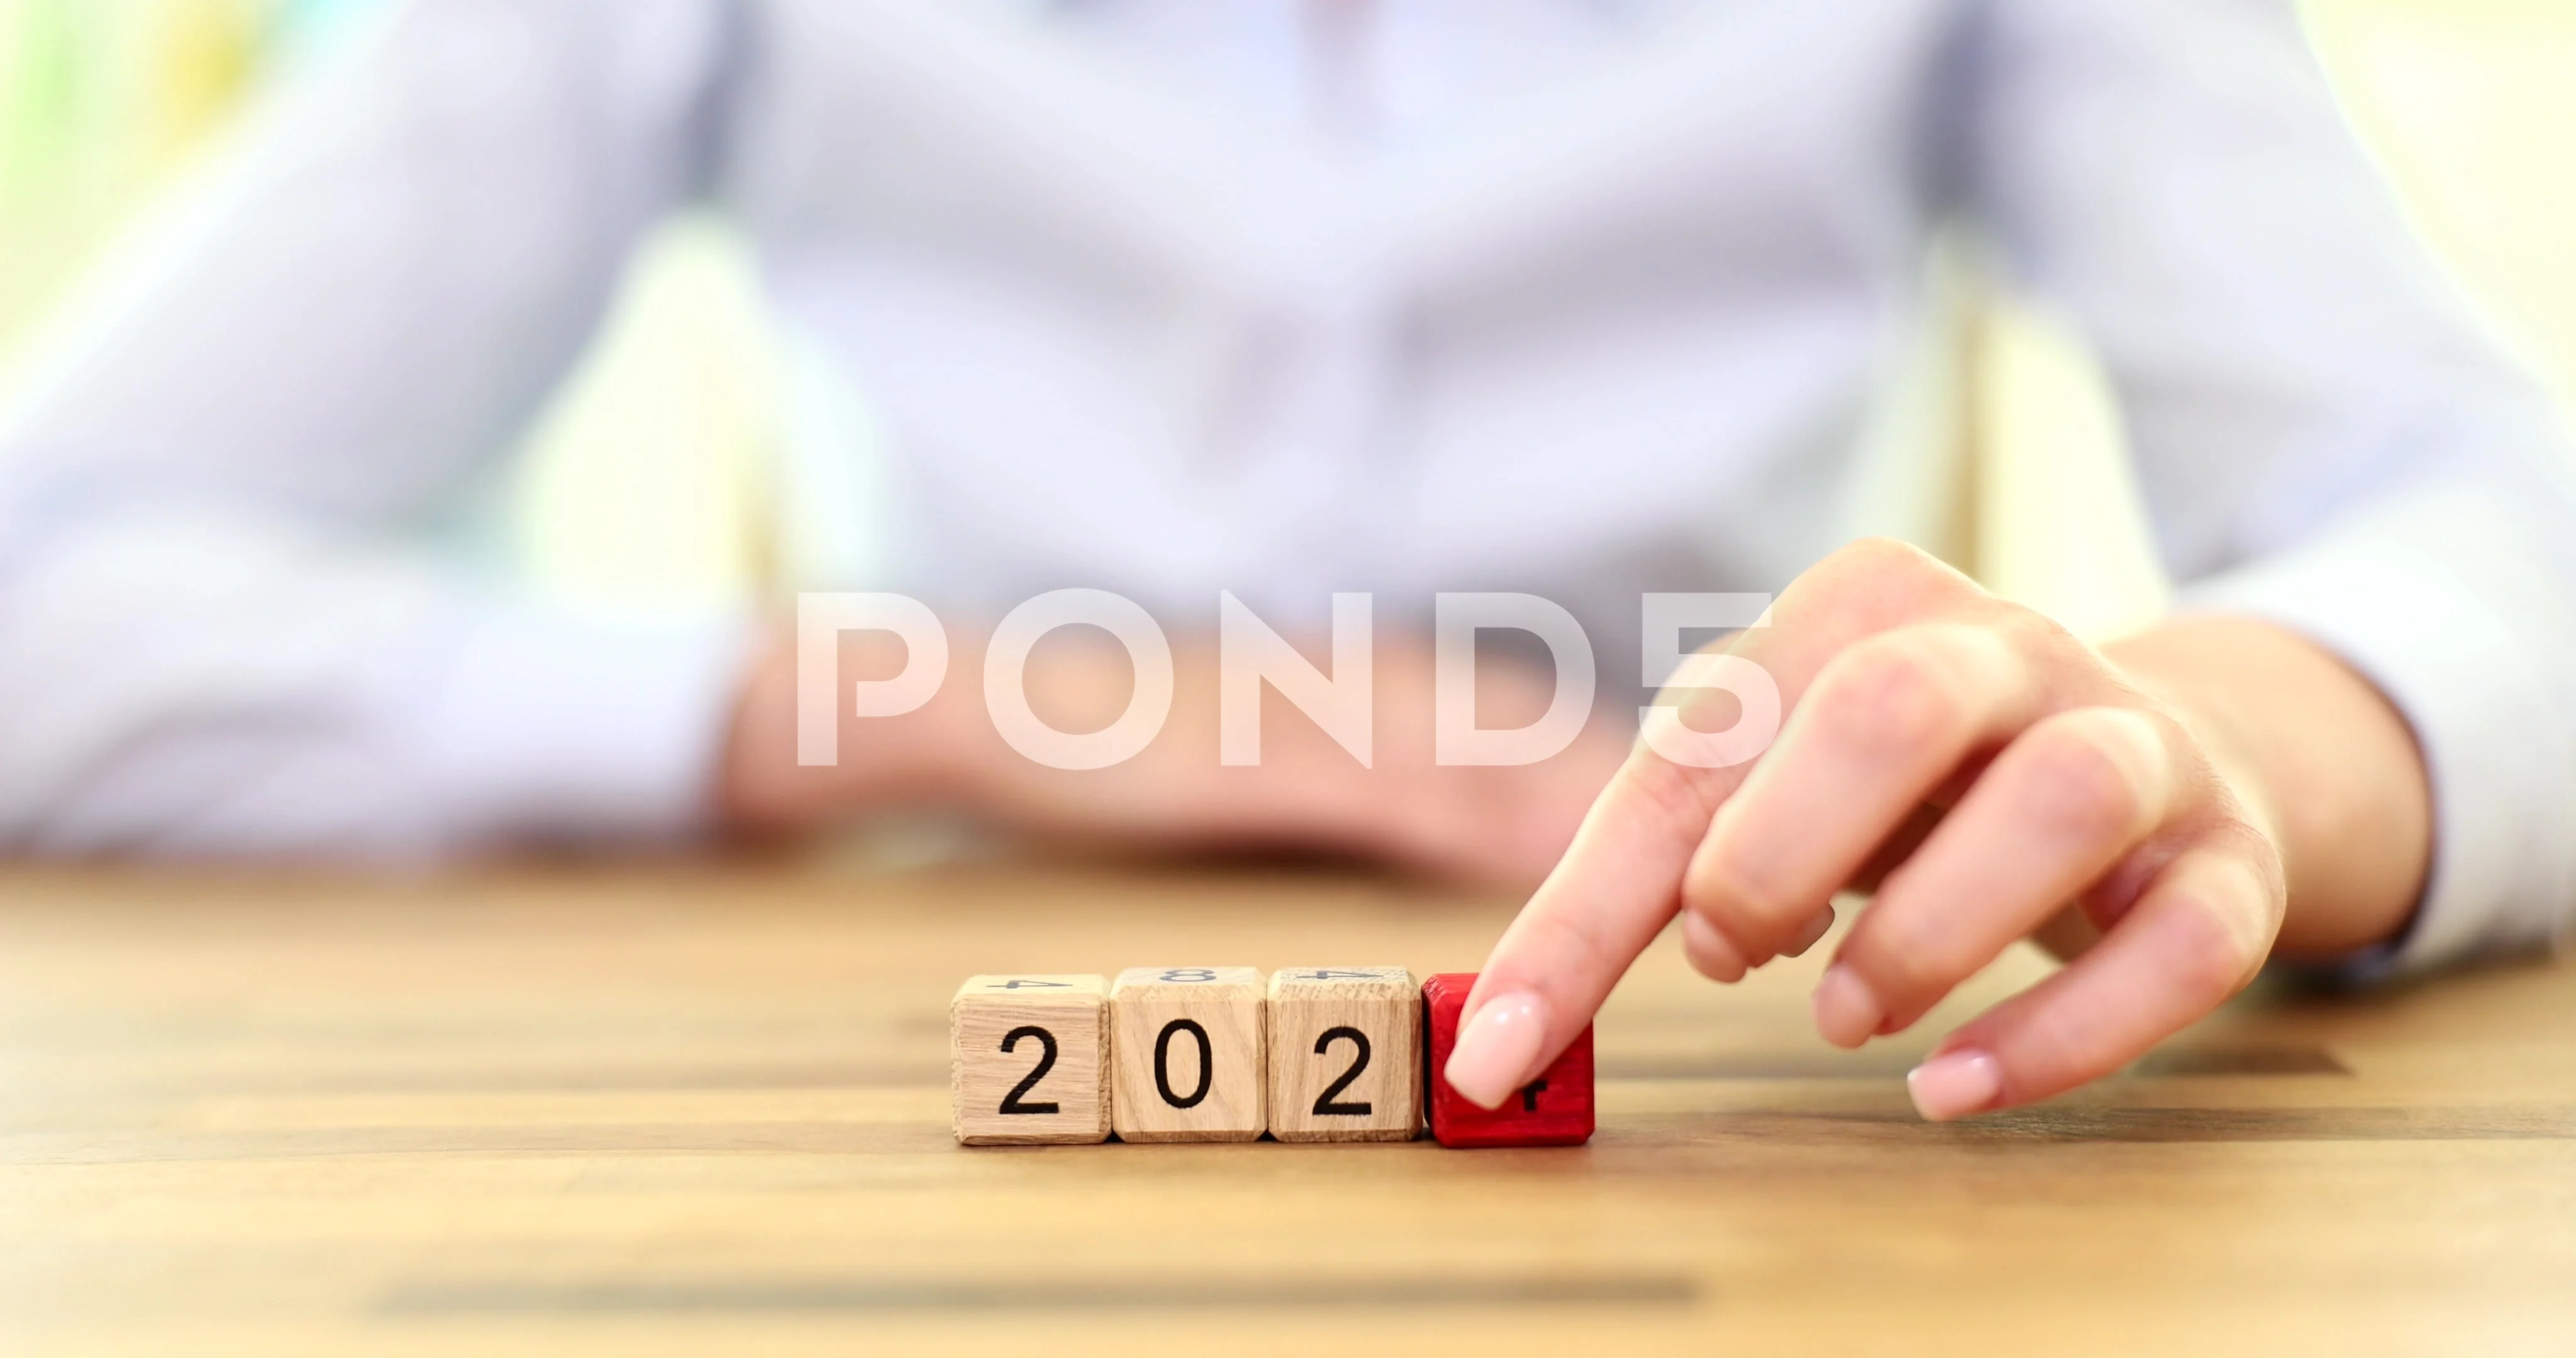 Hand Flipping Of 2023 To 2024 On Wooden Block Cube For Preparation